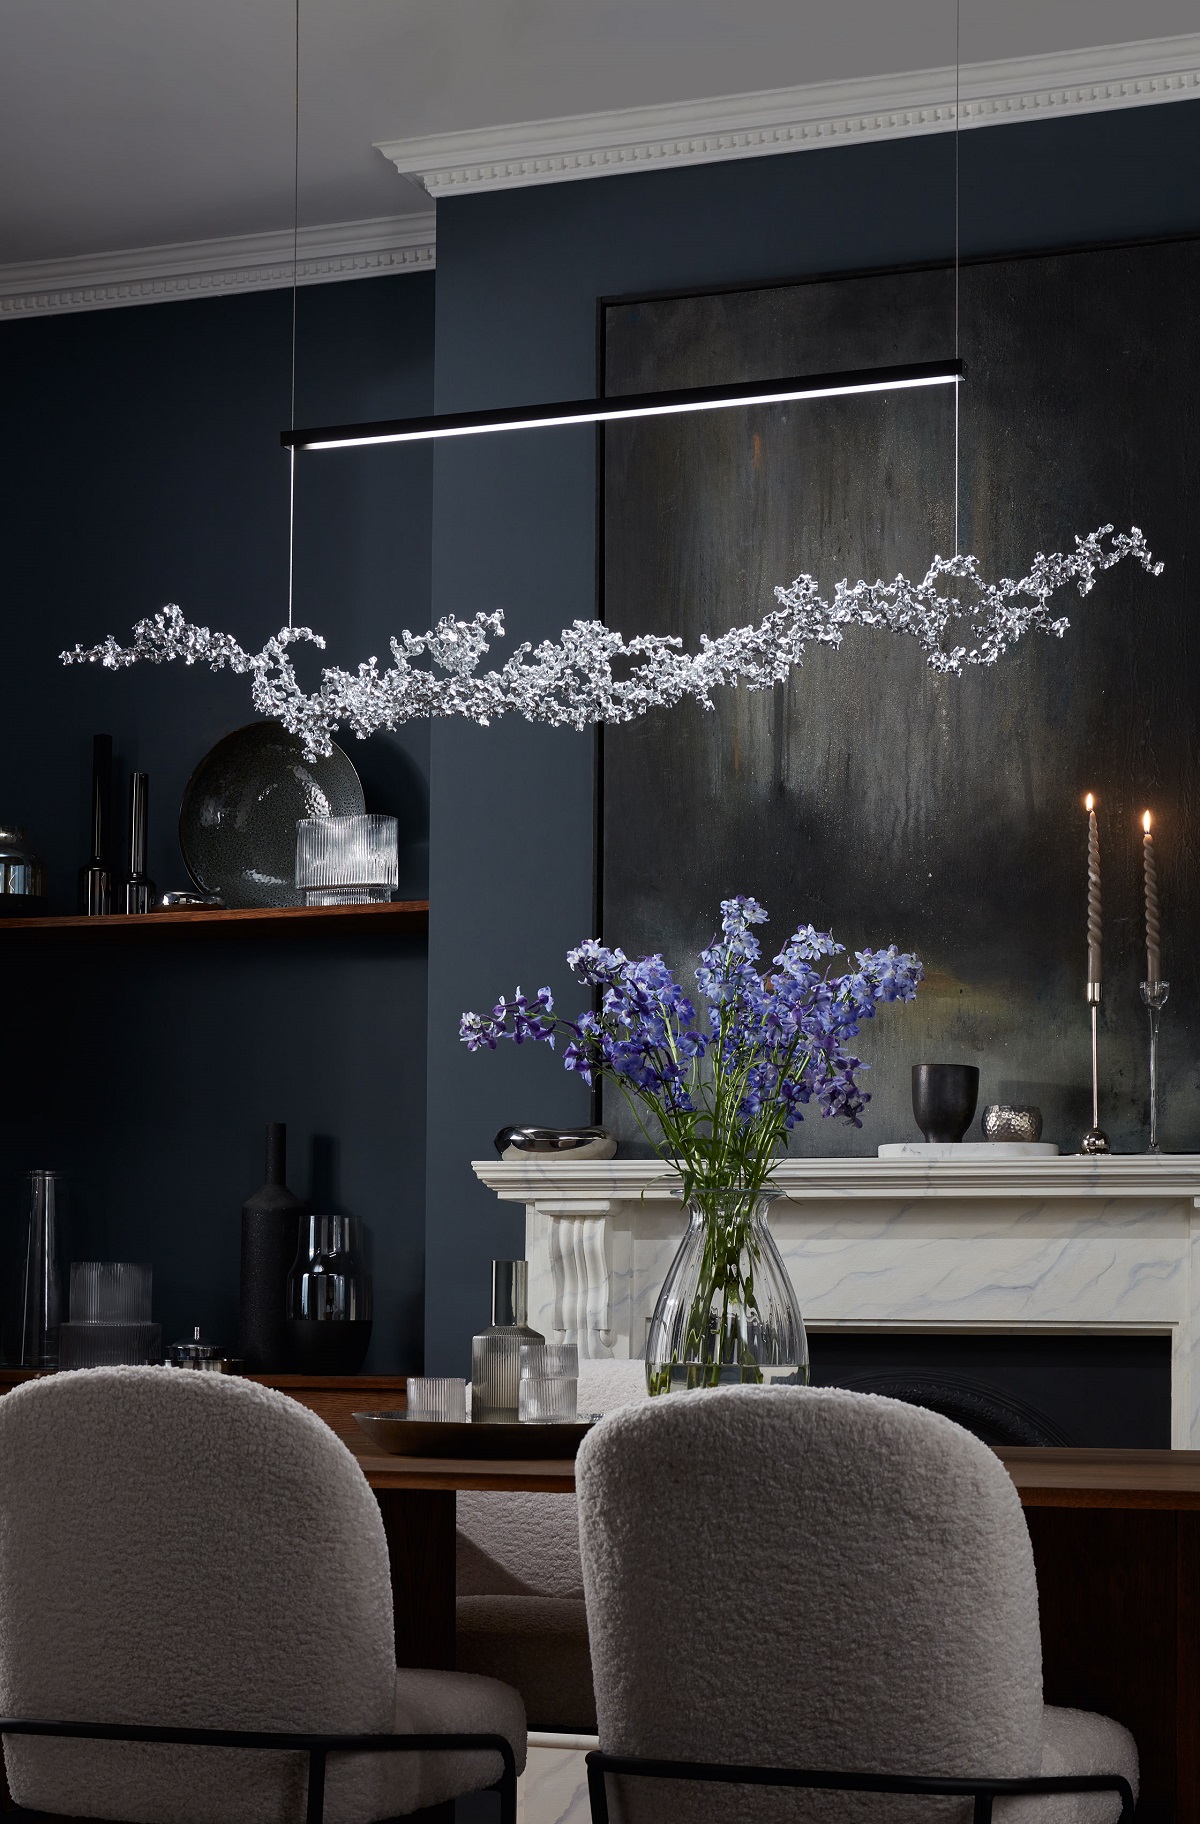 blossom pendant by Christopher Hyde suspended above a table